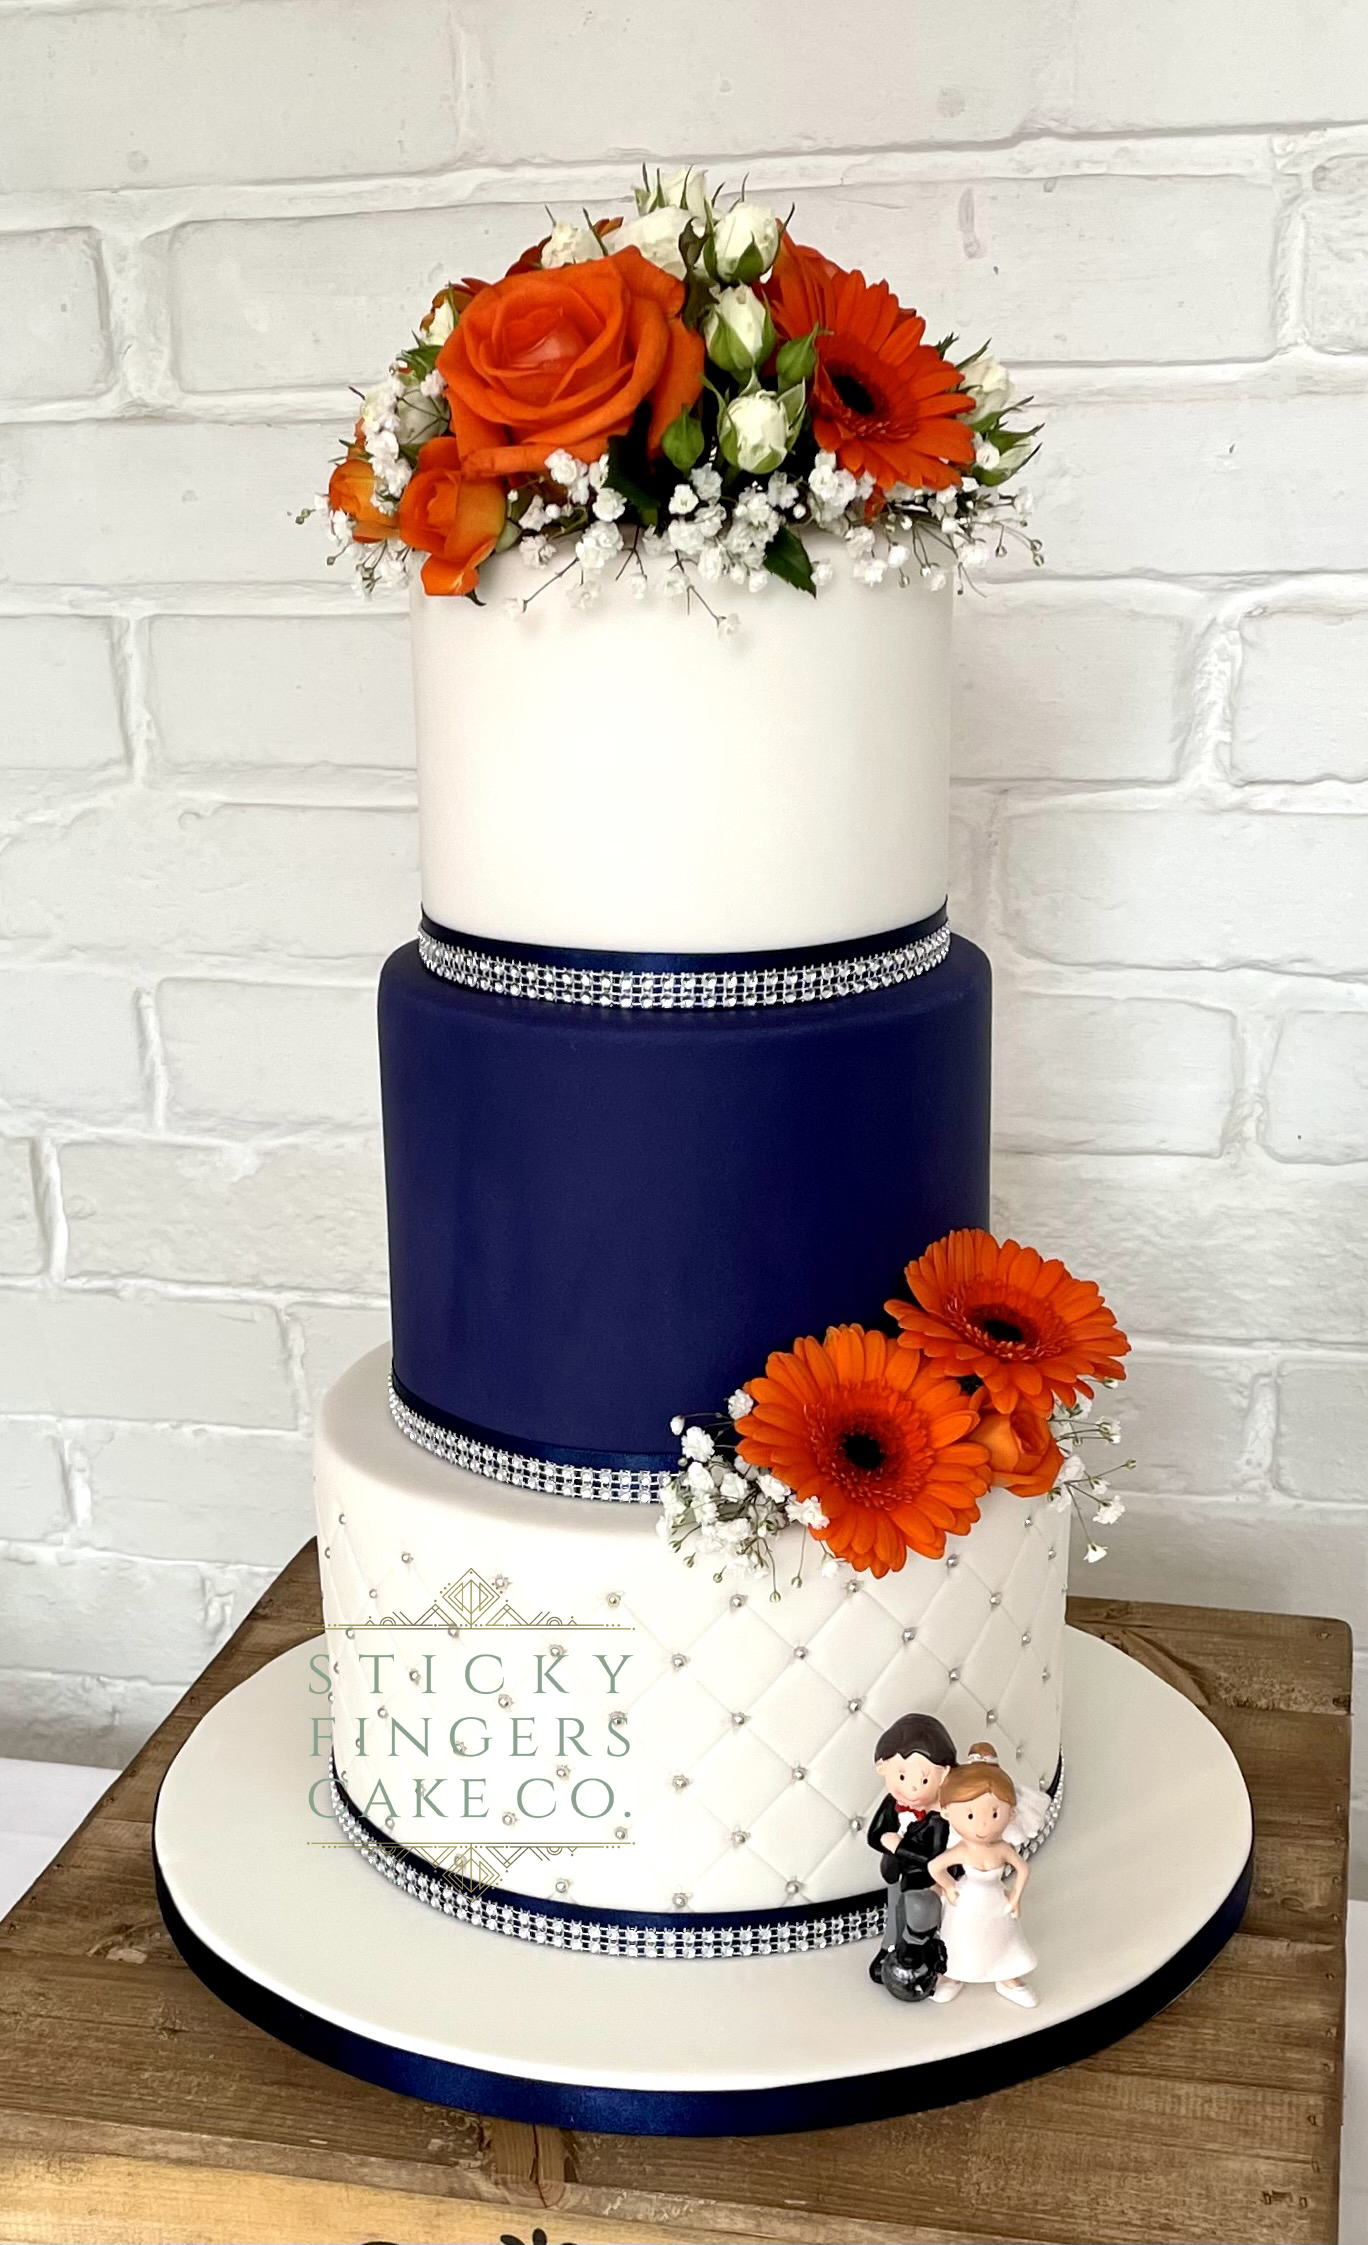 3 Tier Iced Wedding Cake, The Old Parish Rooms, Rayleigh – September 2021